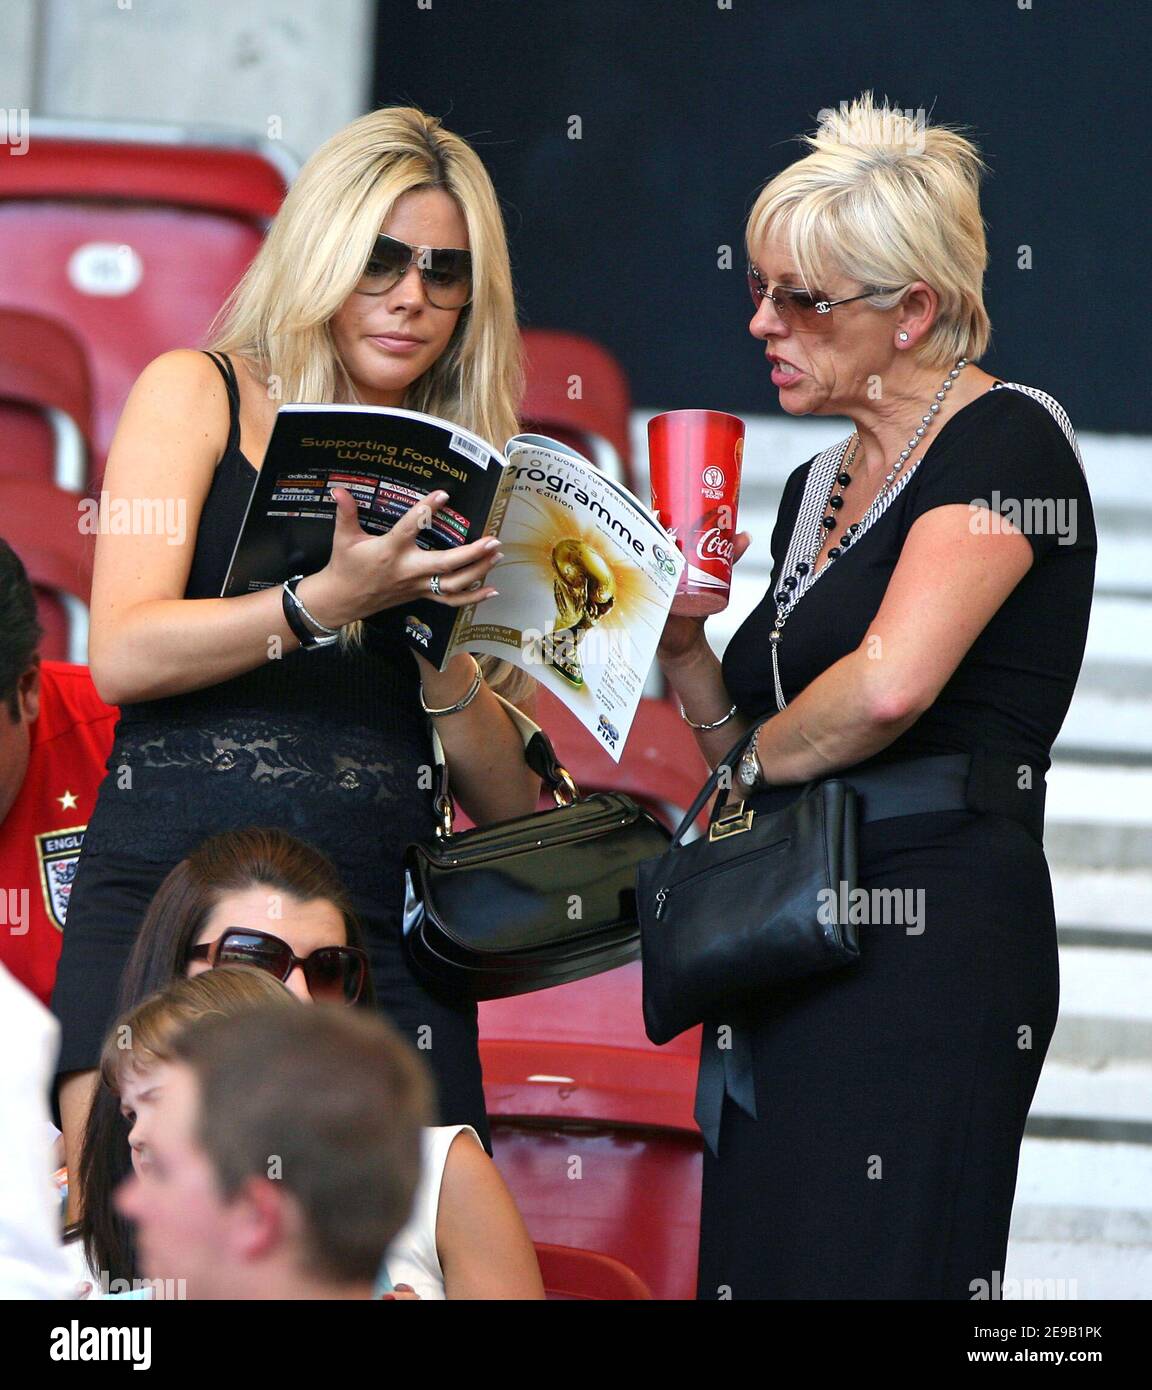 Toni Poole, fiance of England footballer John Terry attends the English vs Ecuador match as part of the 2006 Worl Cup, in Stuttgart, Germany, on June 25, 2006. Photo by Gouhier-Hahn-Orban/Cameleon/ABACAPRESS.COM Stock Photo